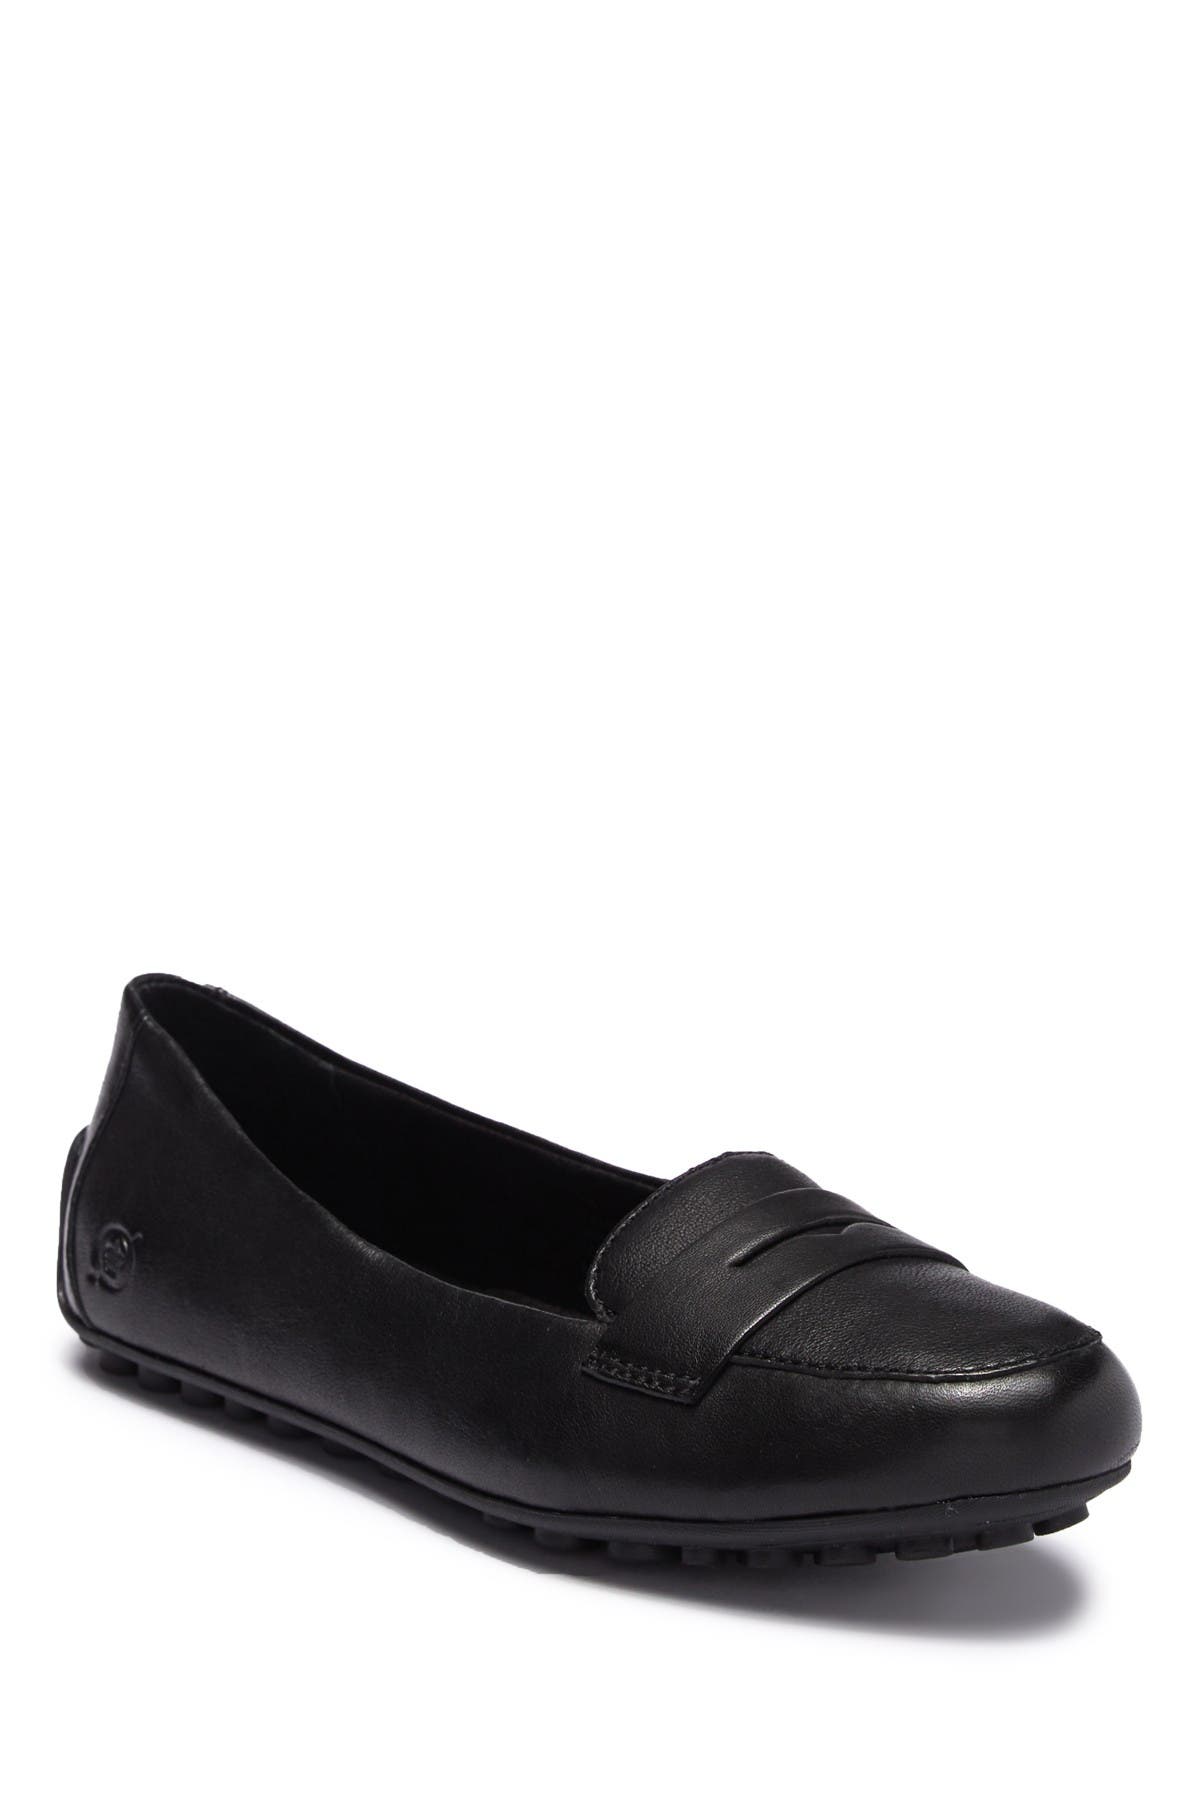 nordstrom rack born womens shoes